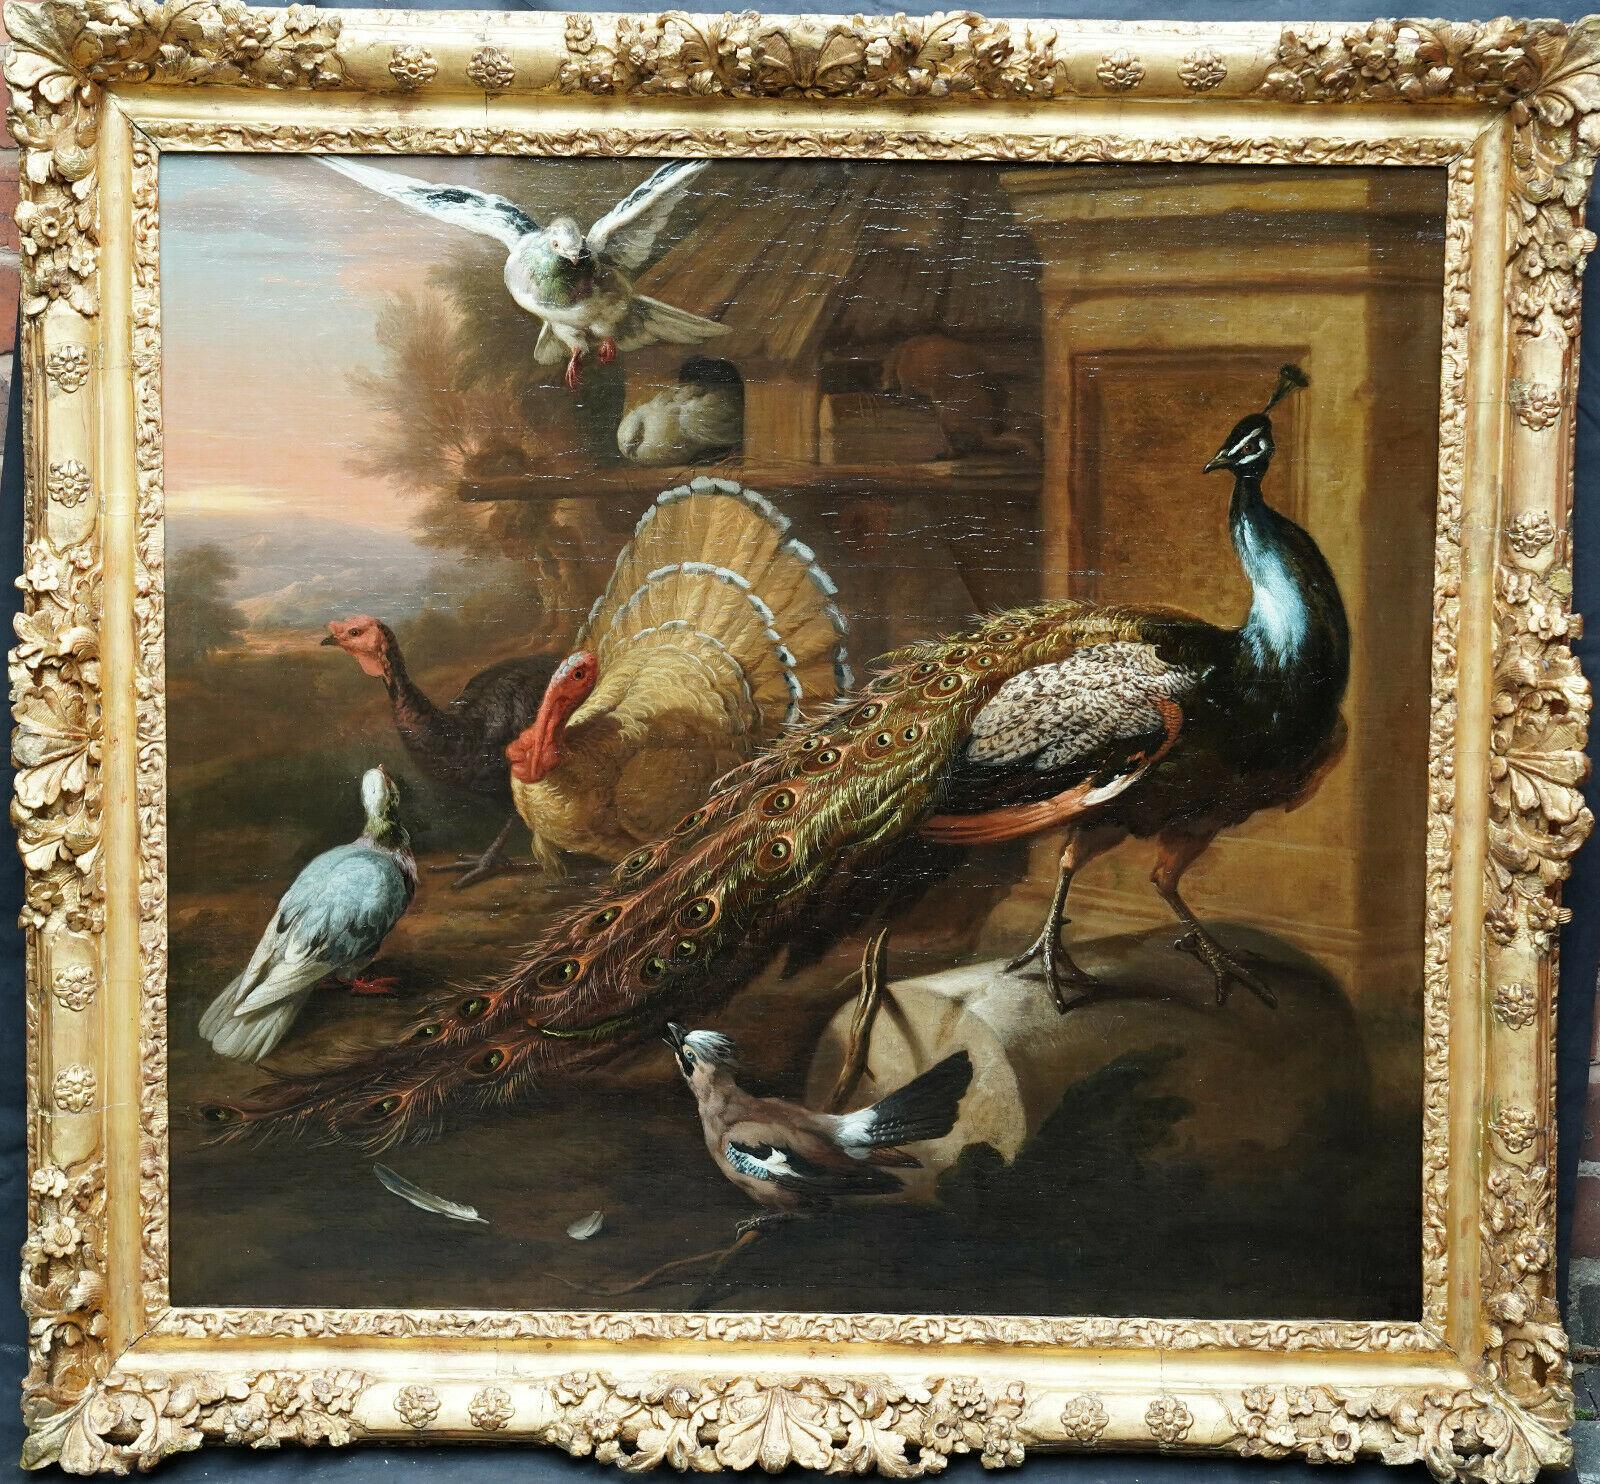 Marmaduke Cradock Animal Painting - Peacock and Birds in a Landscape - British 17thC Old Master animal oil painting